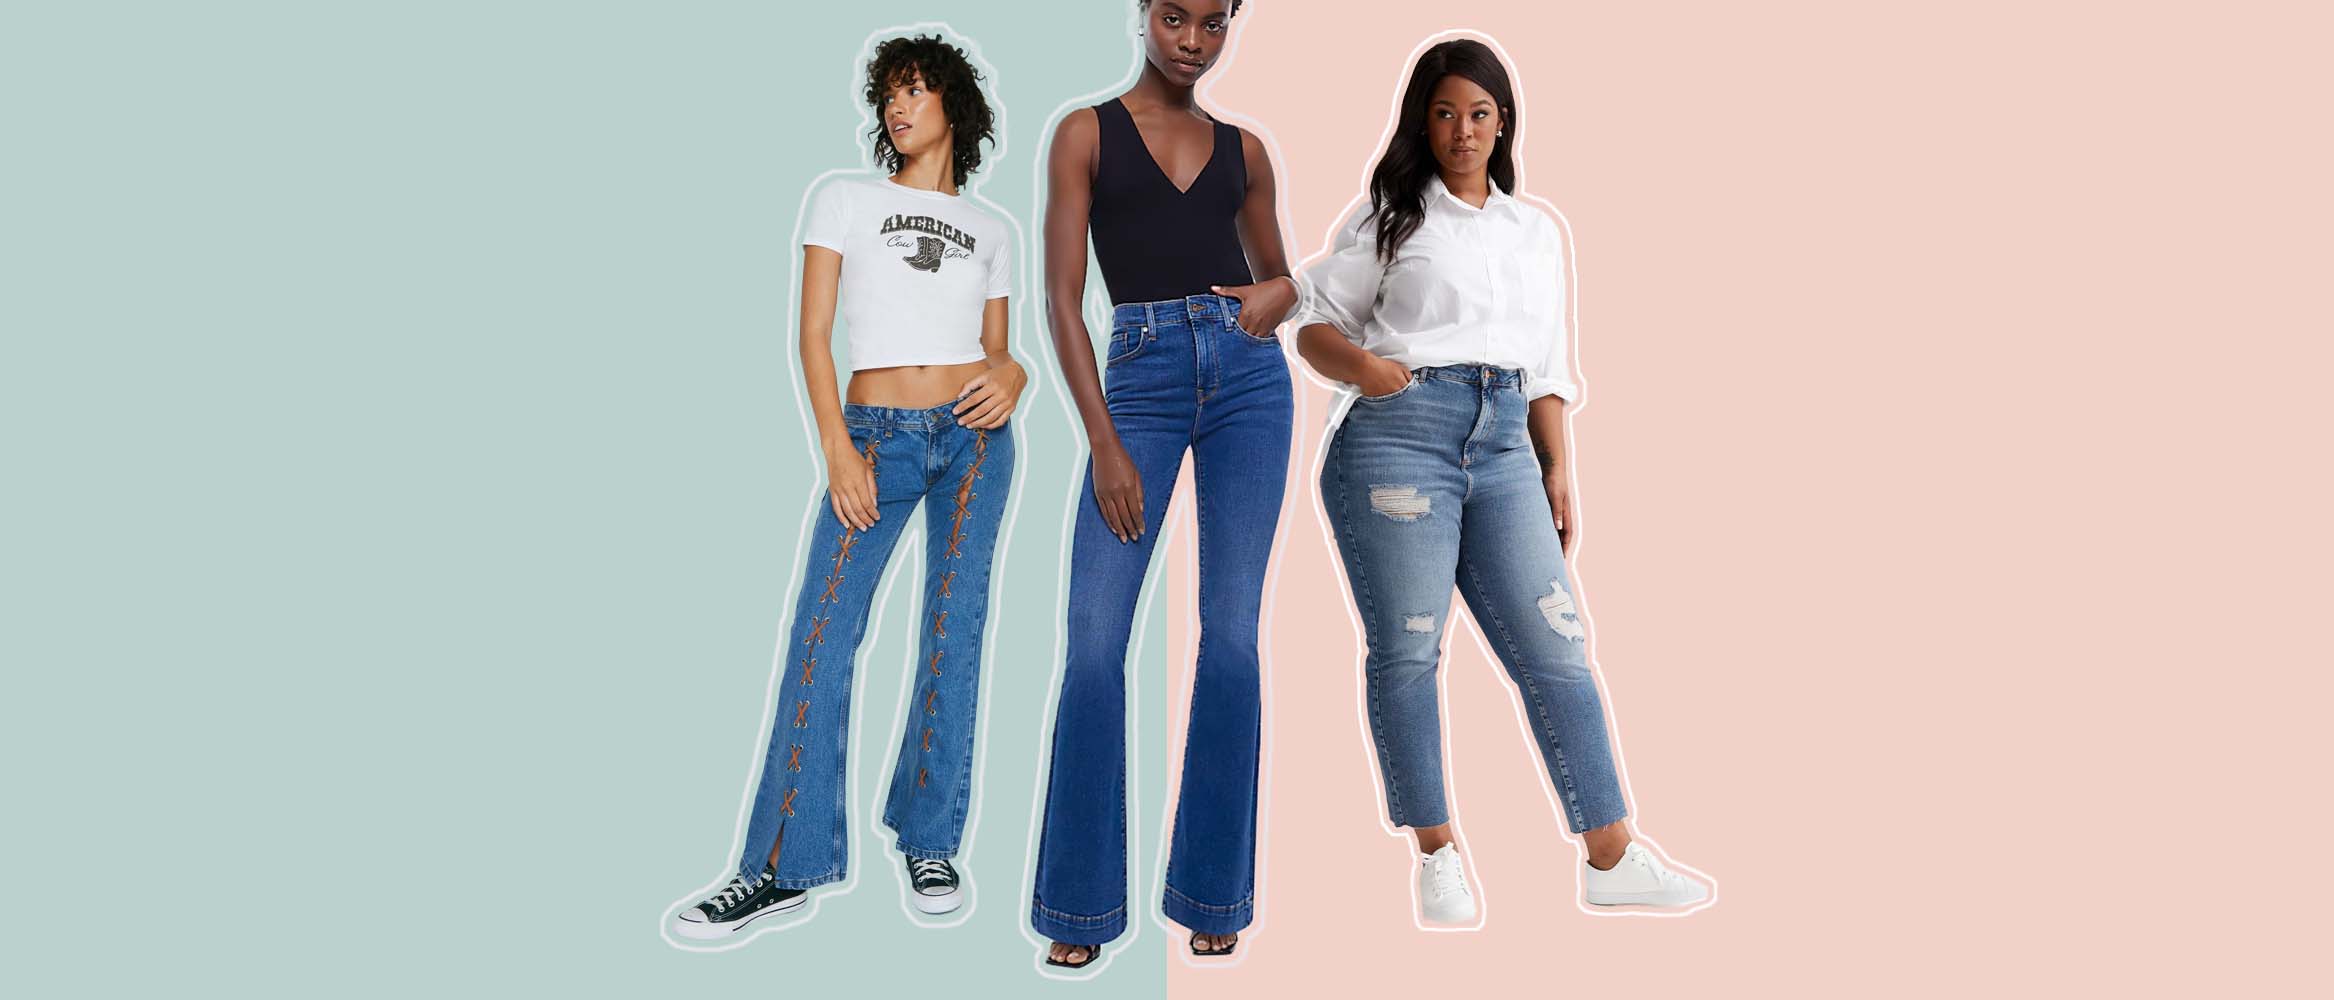 Pull On Perfect Fit Jeans - Infashion